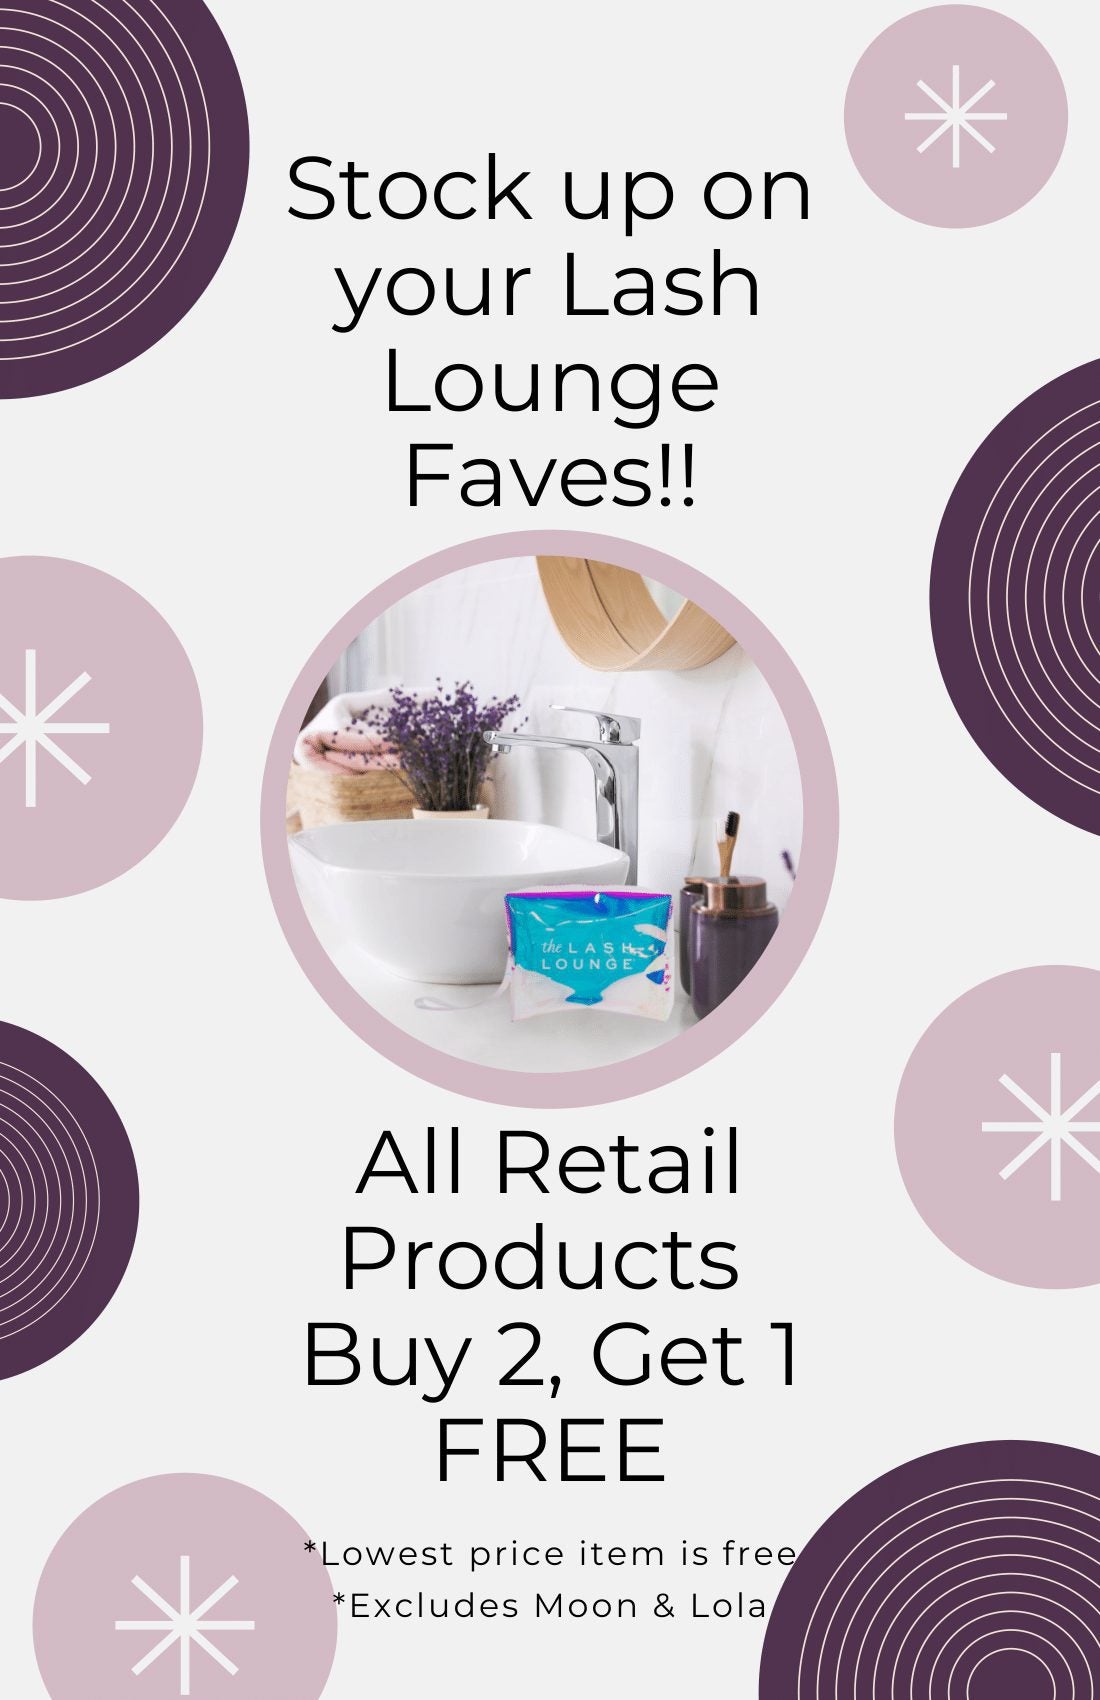 Stock up on your Lash Lounge Faves at The Lash Lounge Brier Creek